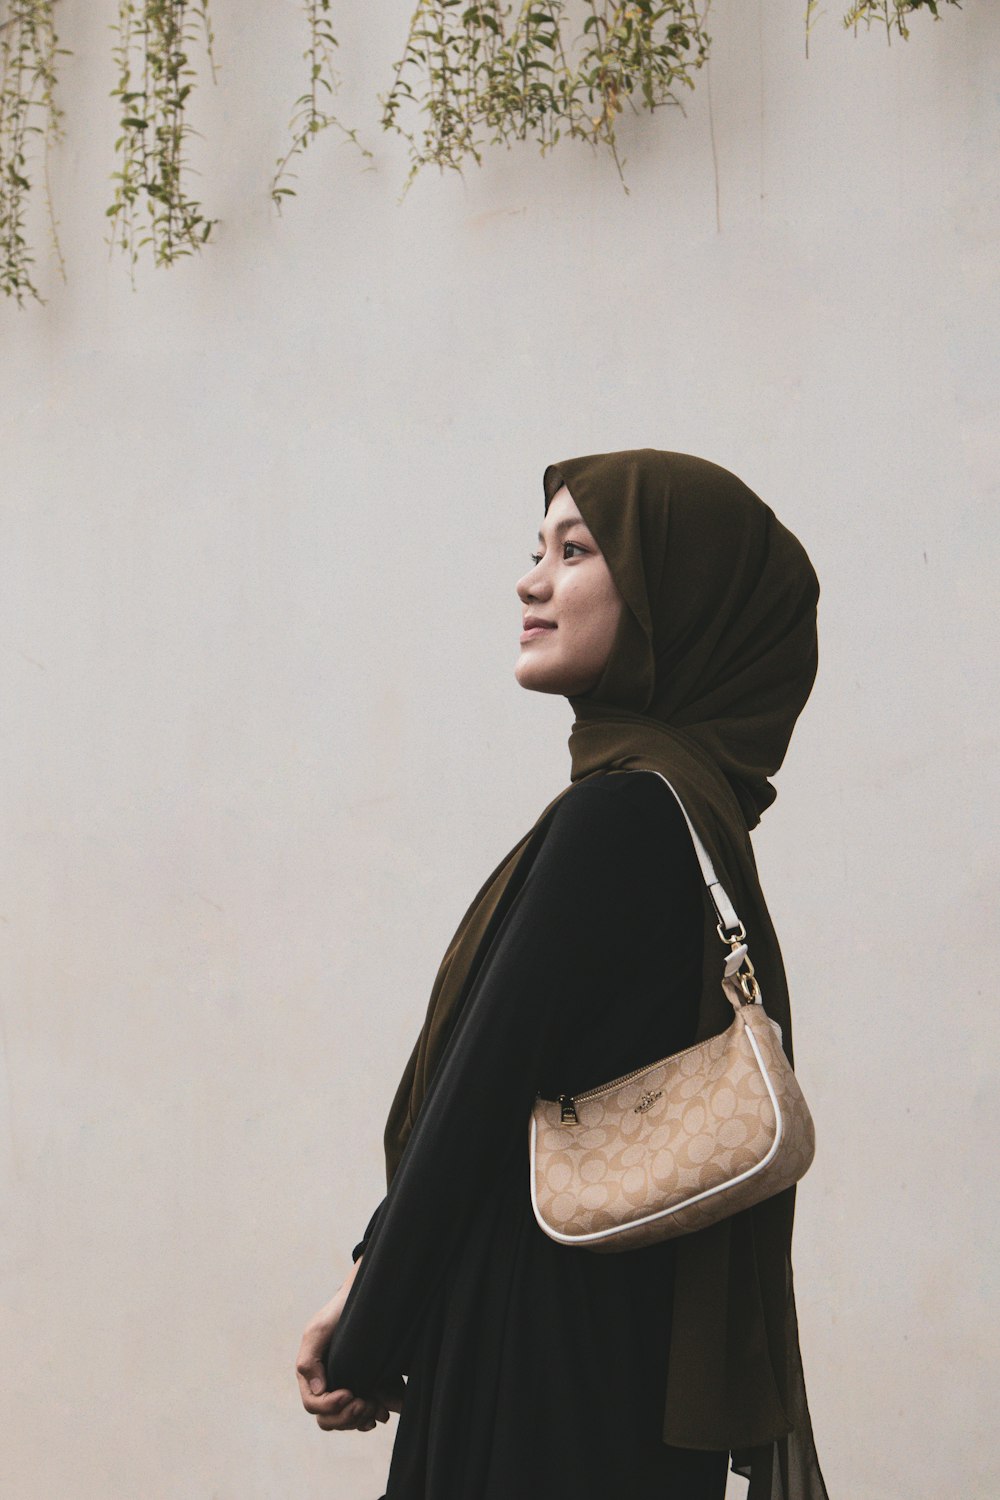 a woman in a hijab carrying a purse